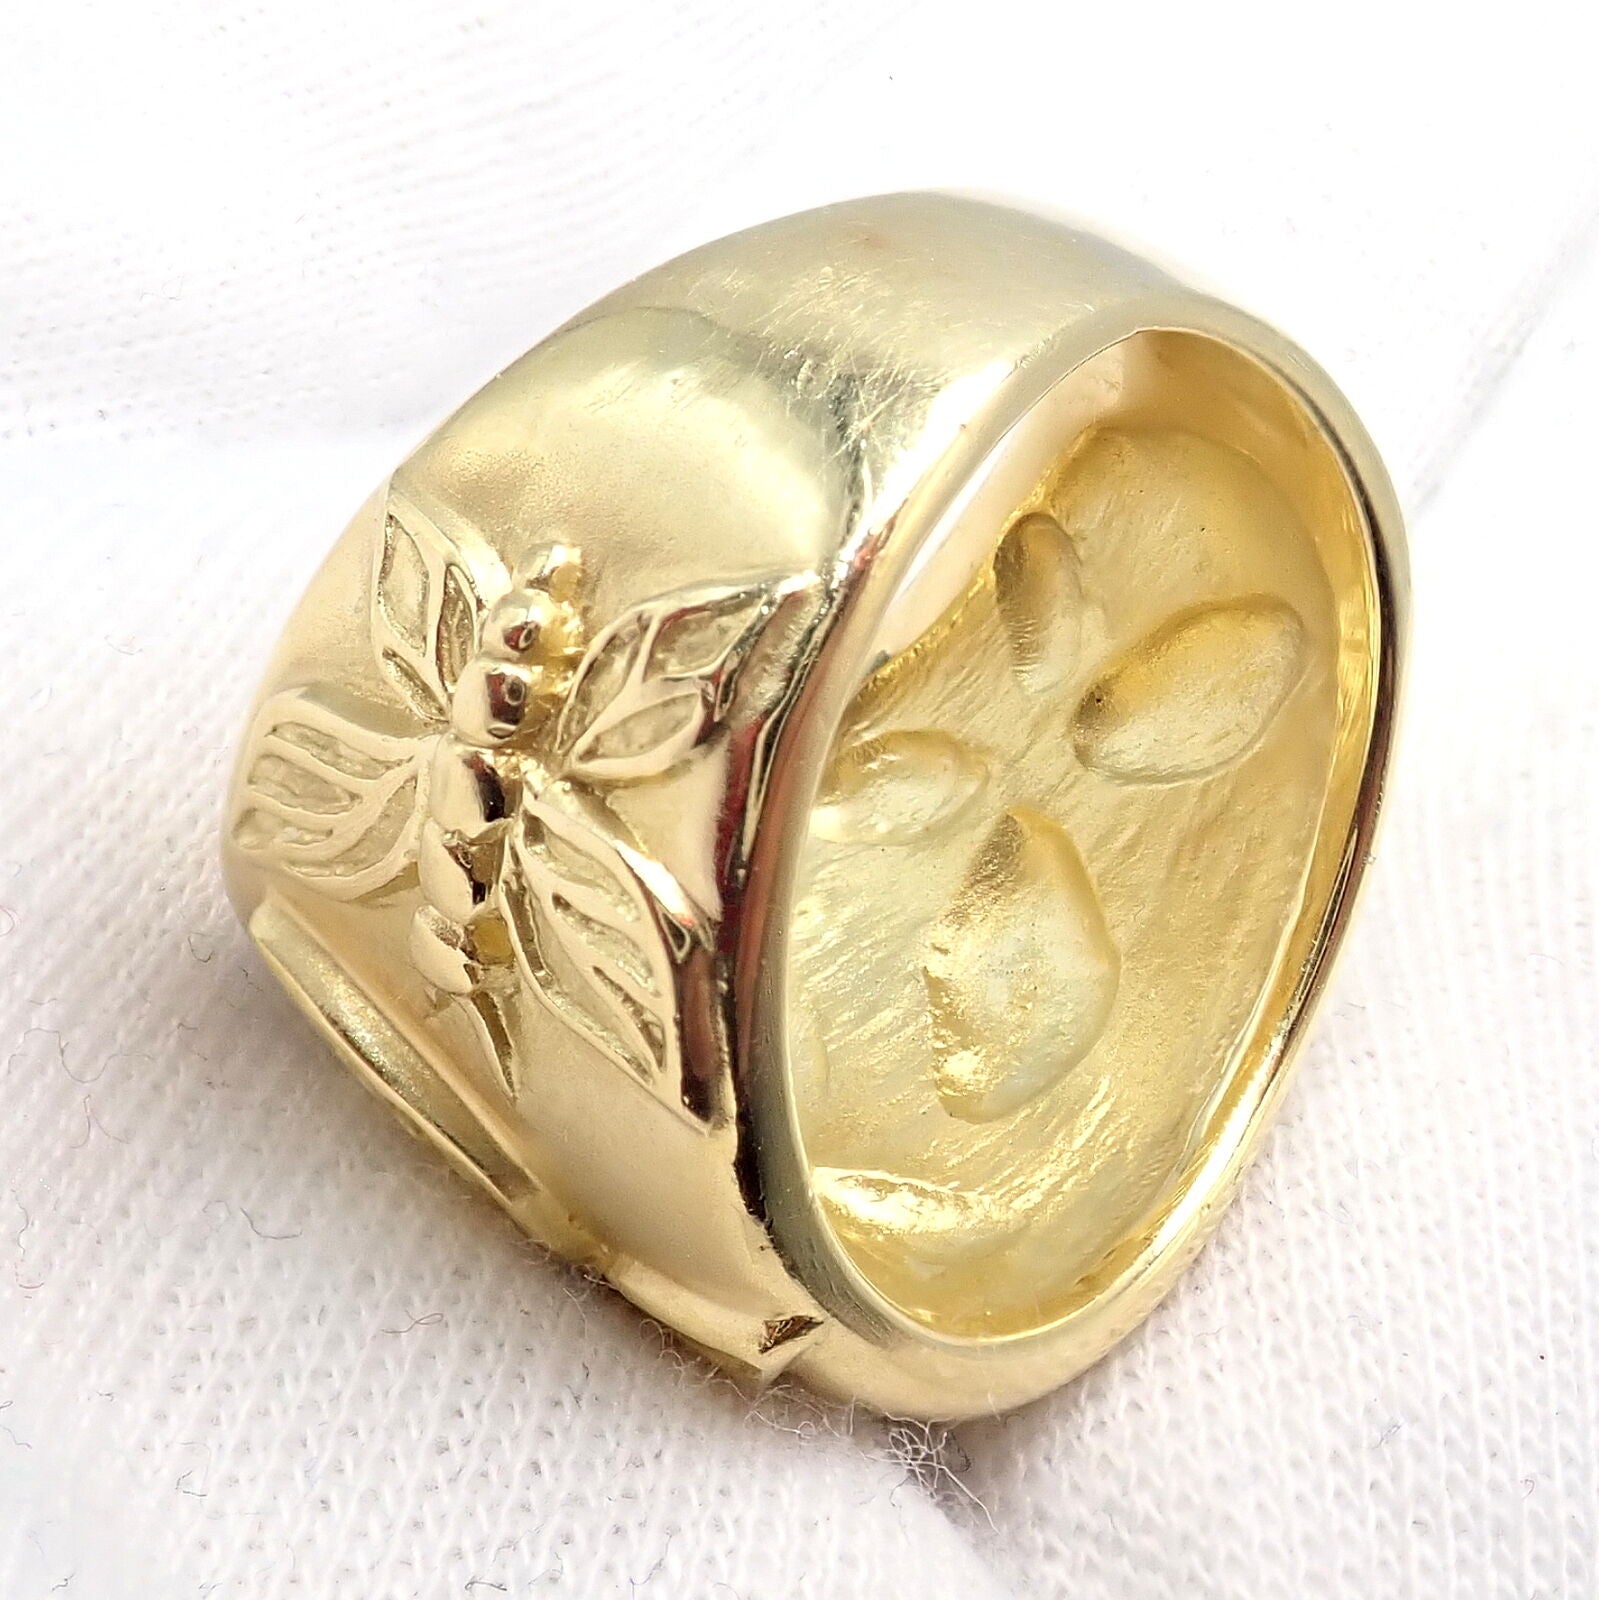 SeidenGang Jewelry & Watches:Fine Jewelry:Rings Rare! Vintage SeidenGang 18k Yellow Gold Diamond Butterfly Ring Sz 6